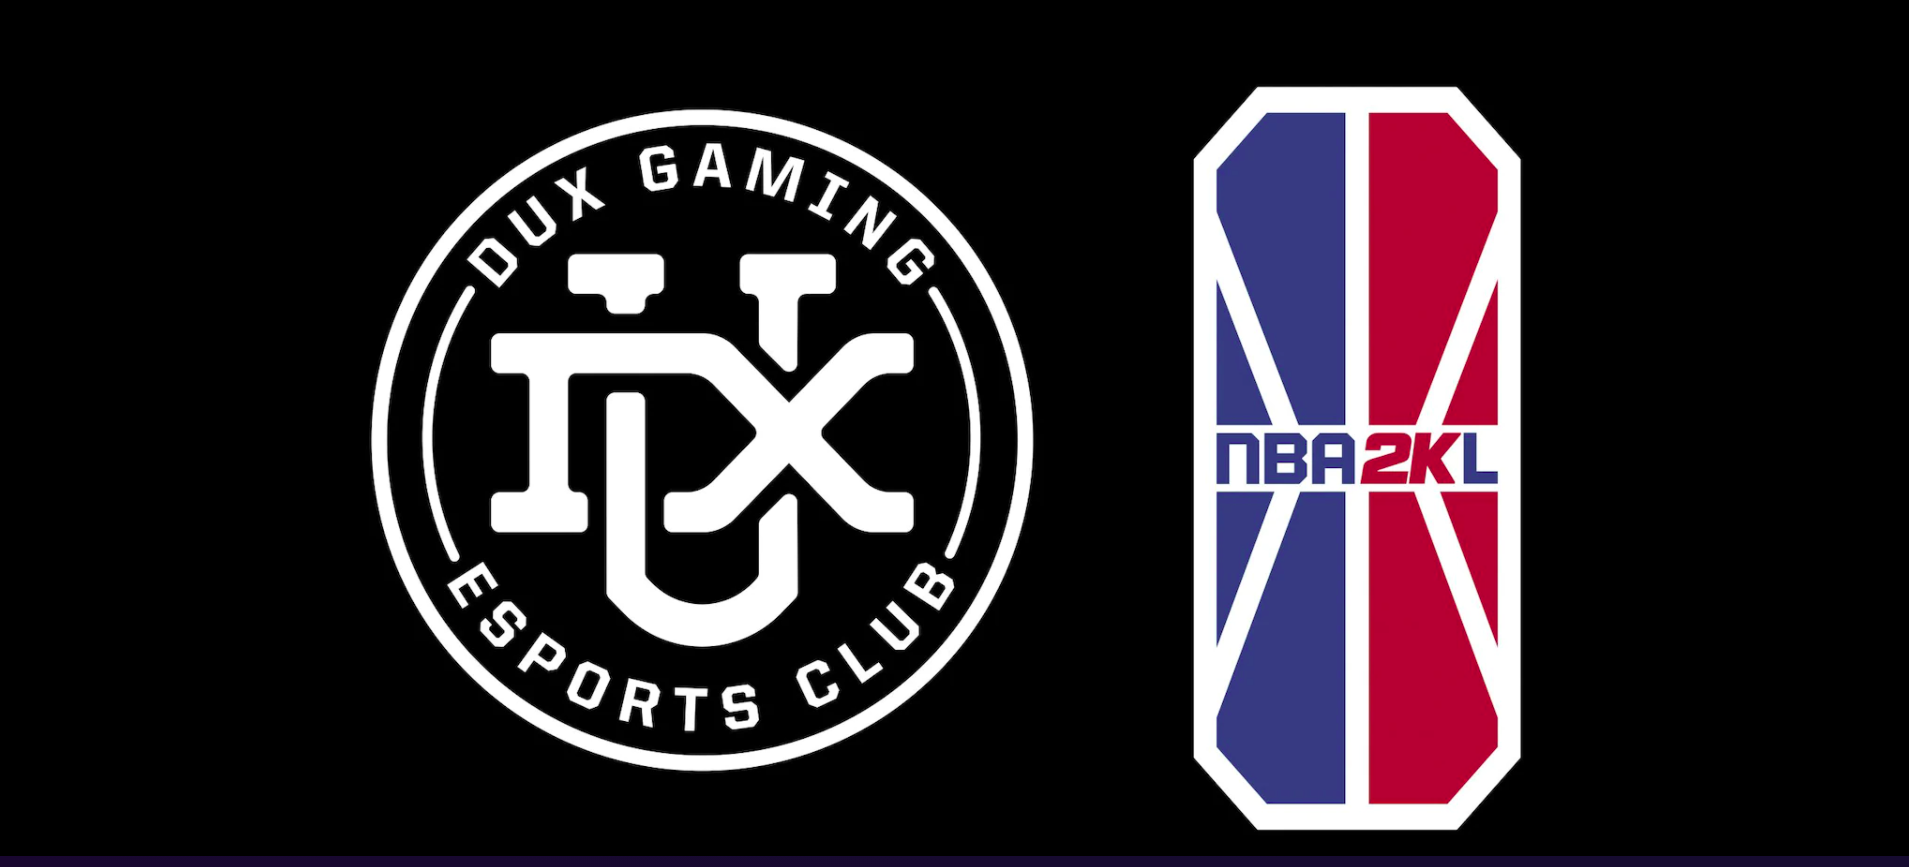 NBA 2K League expands into Mexico with DUX Gaming partnership thumbnail